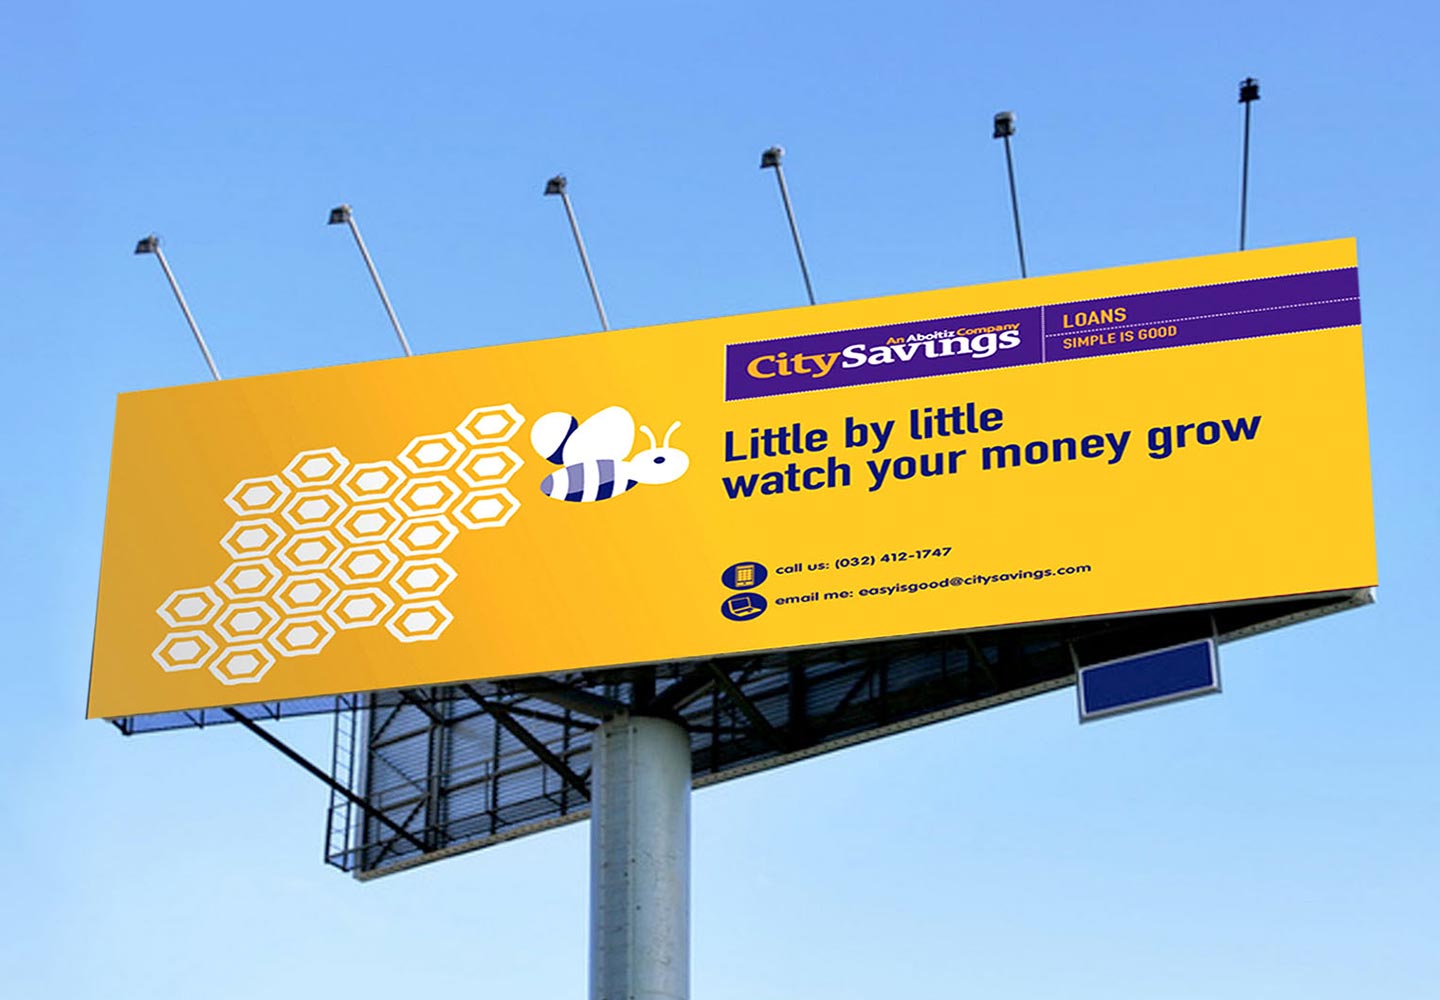 Brand Consultancy in Financial Services Industry. Signage for City Savings Bank.